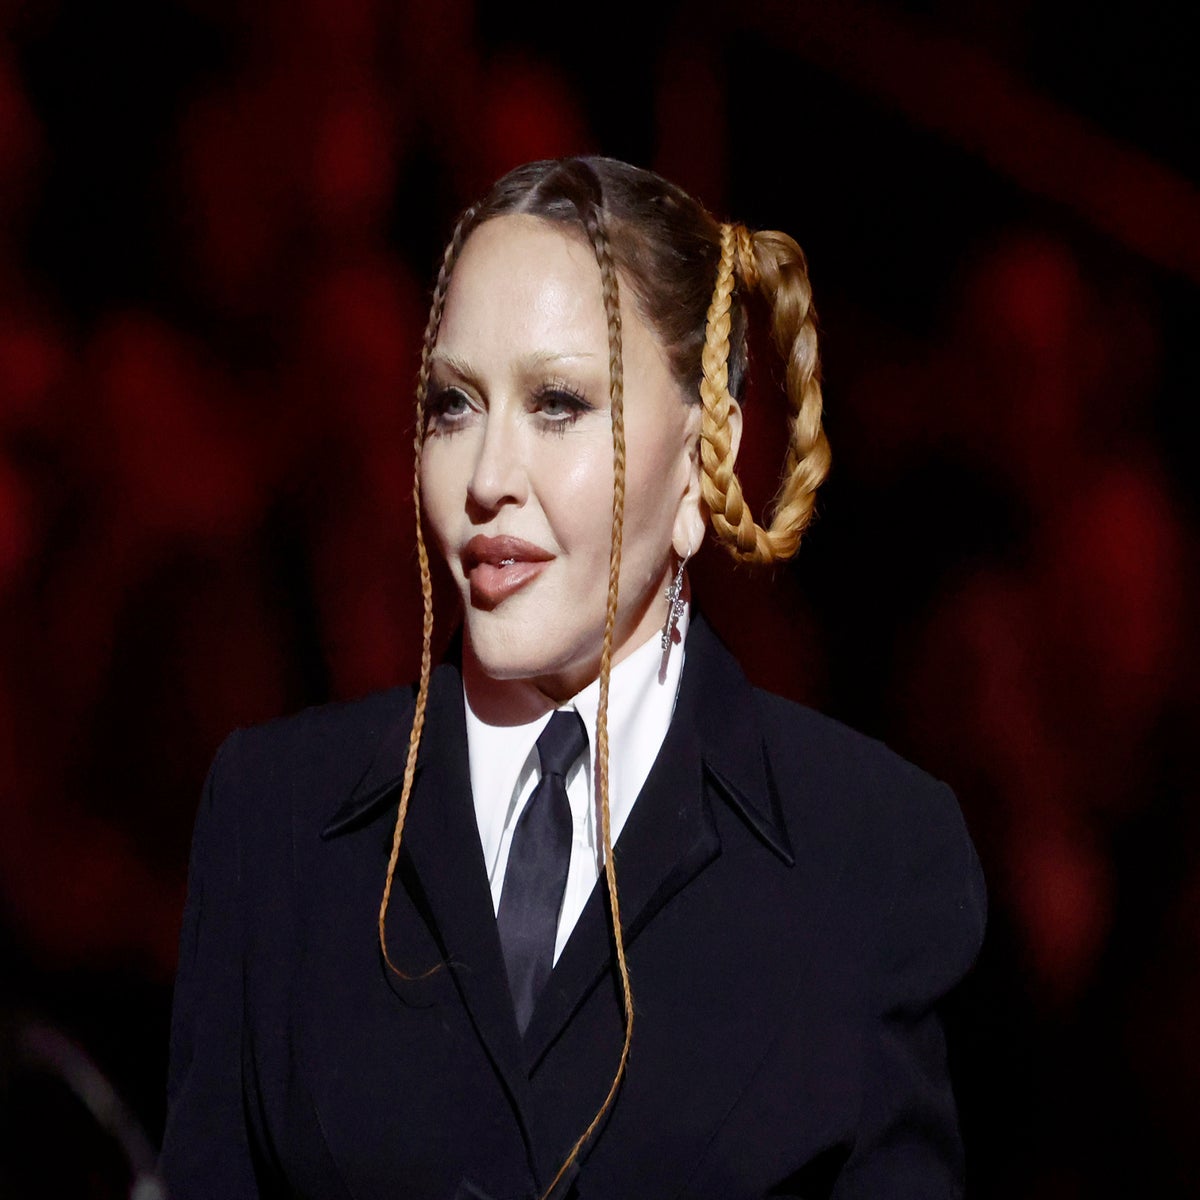 Madonna can't win when it comes to her appearance | The Independent